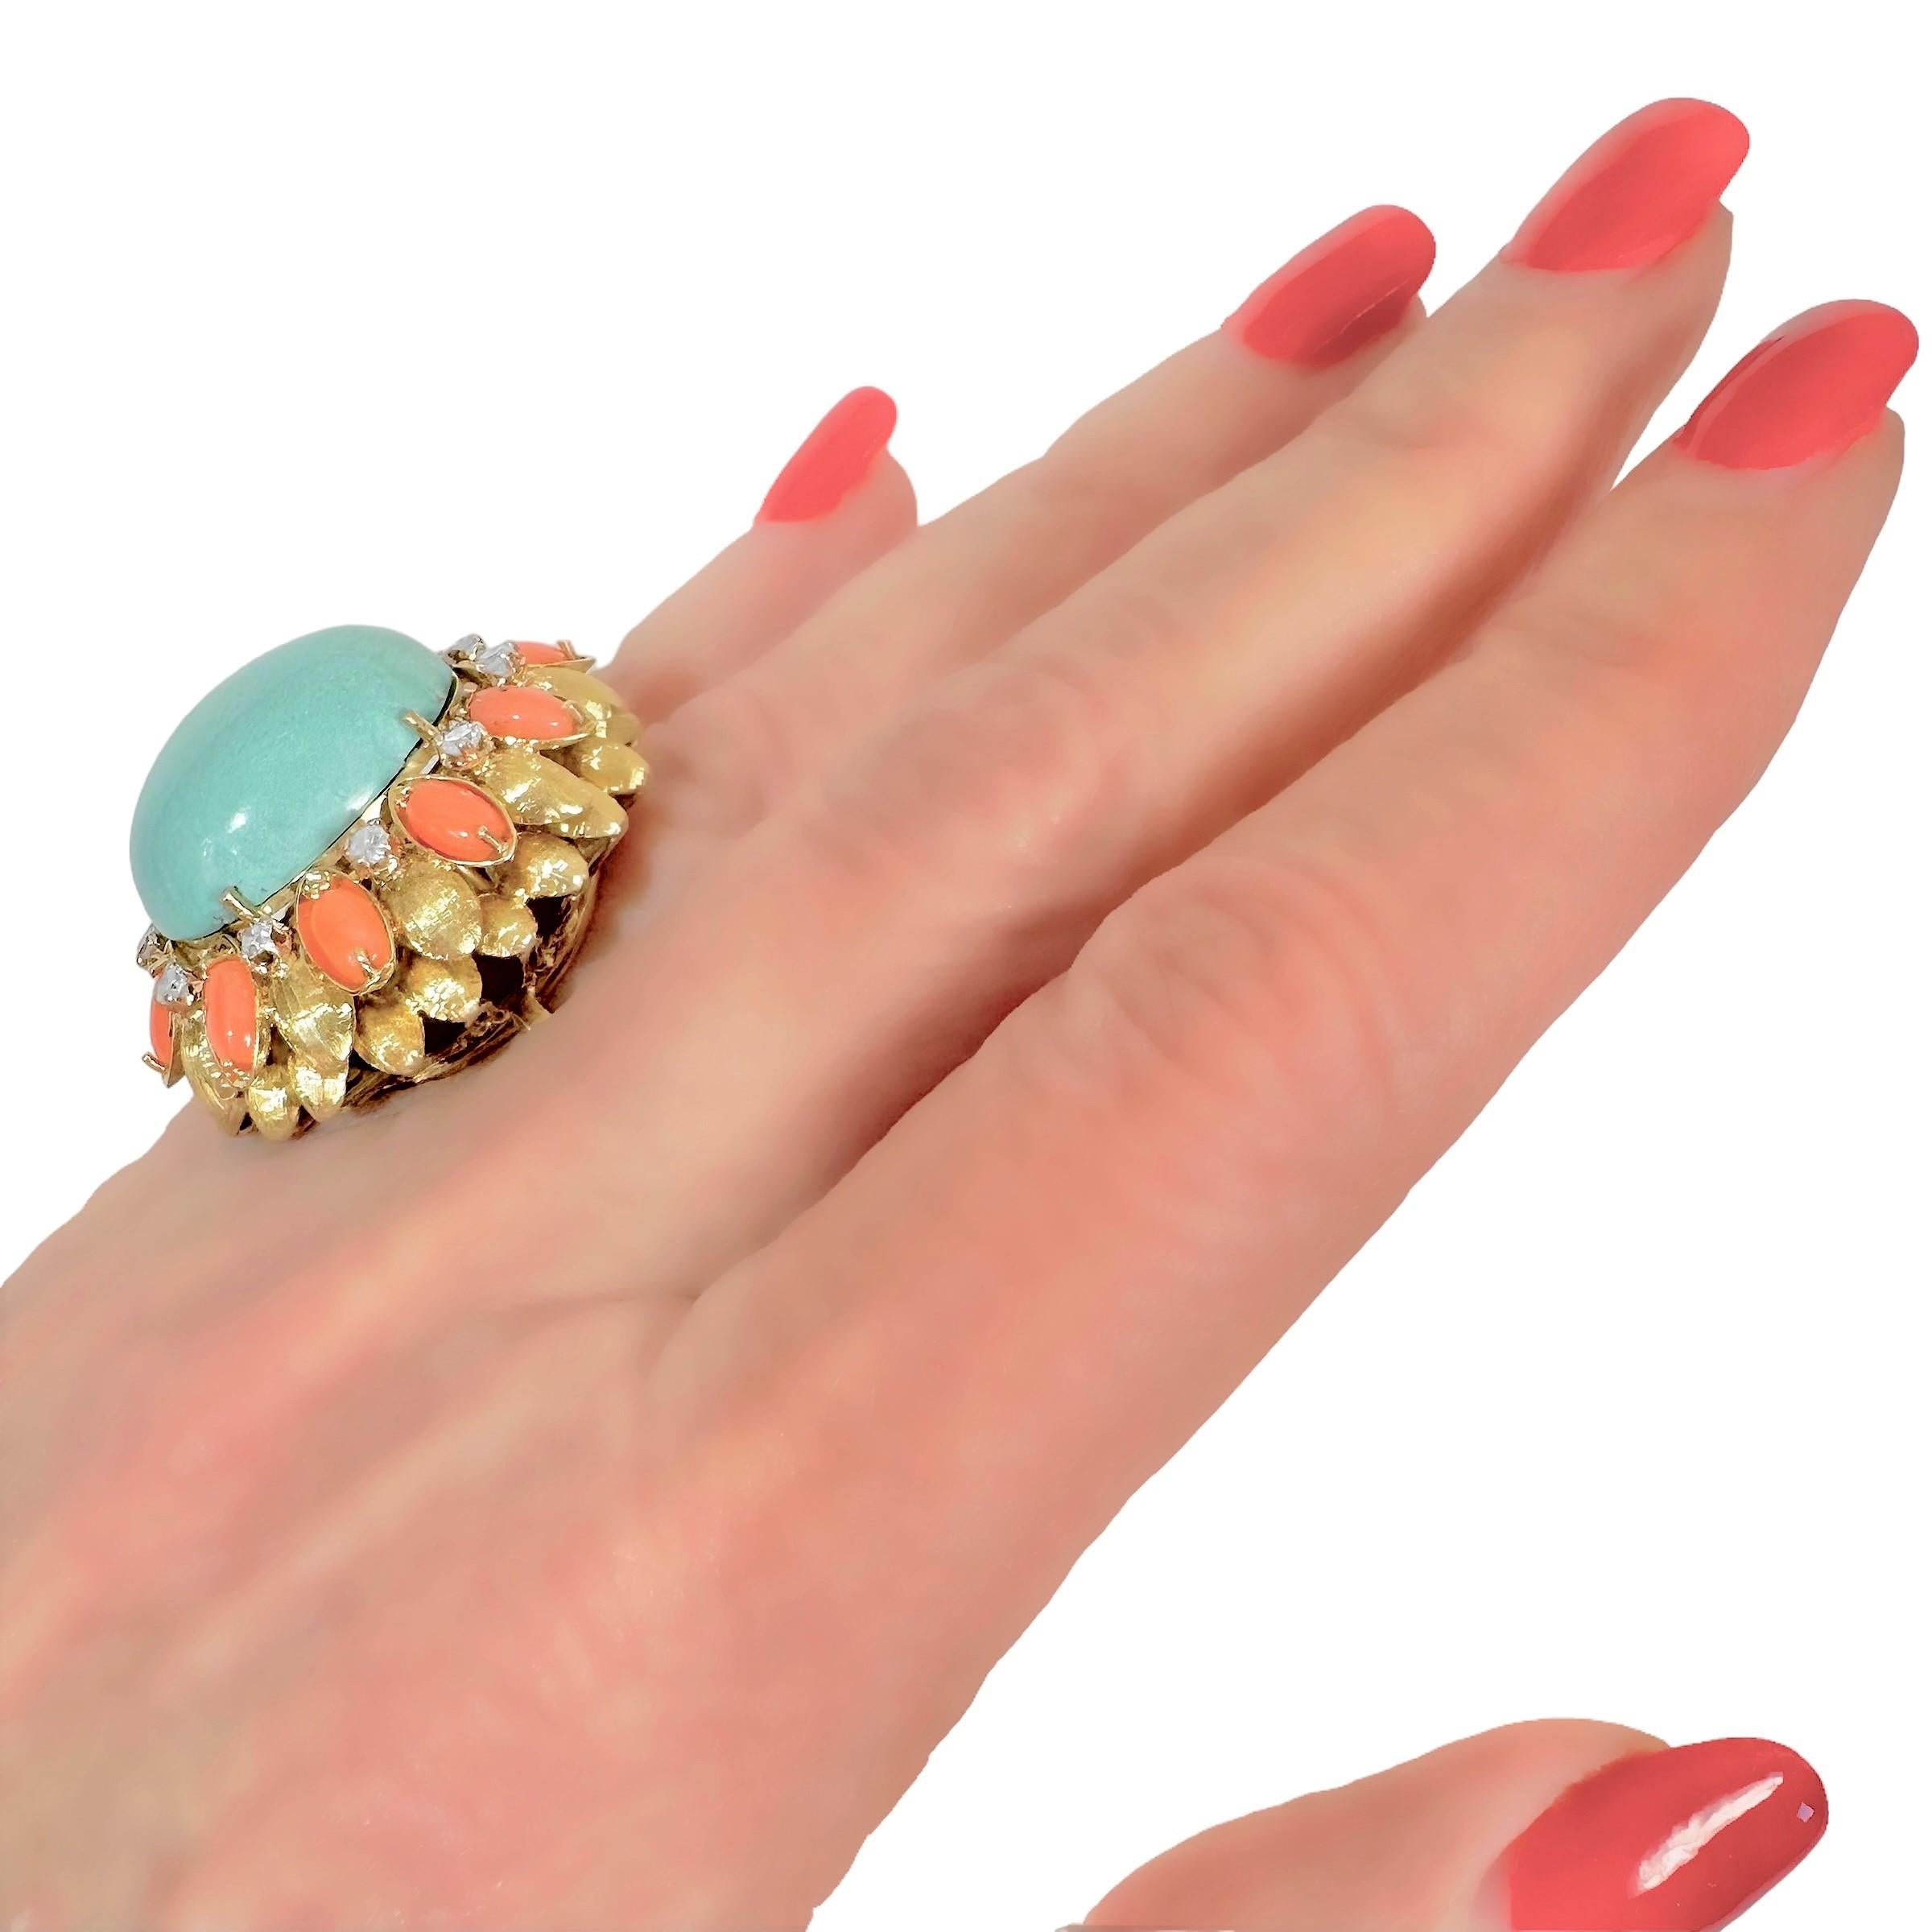 Large Scale Mid-20th Century 18K Yellow Gold, Coral, Turquoise and Diamond Ring 5